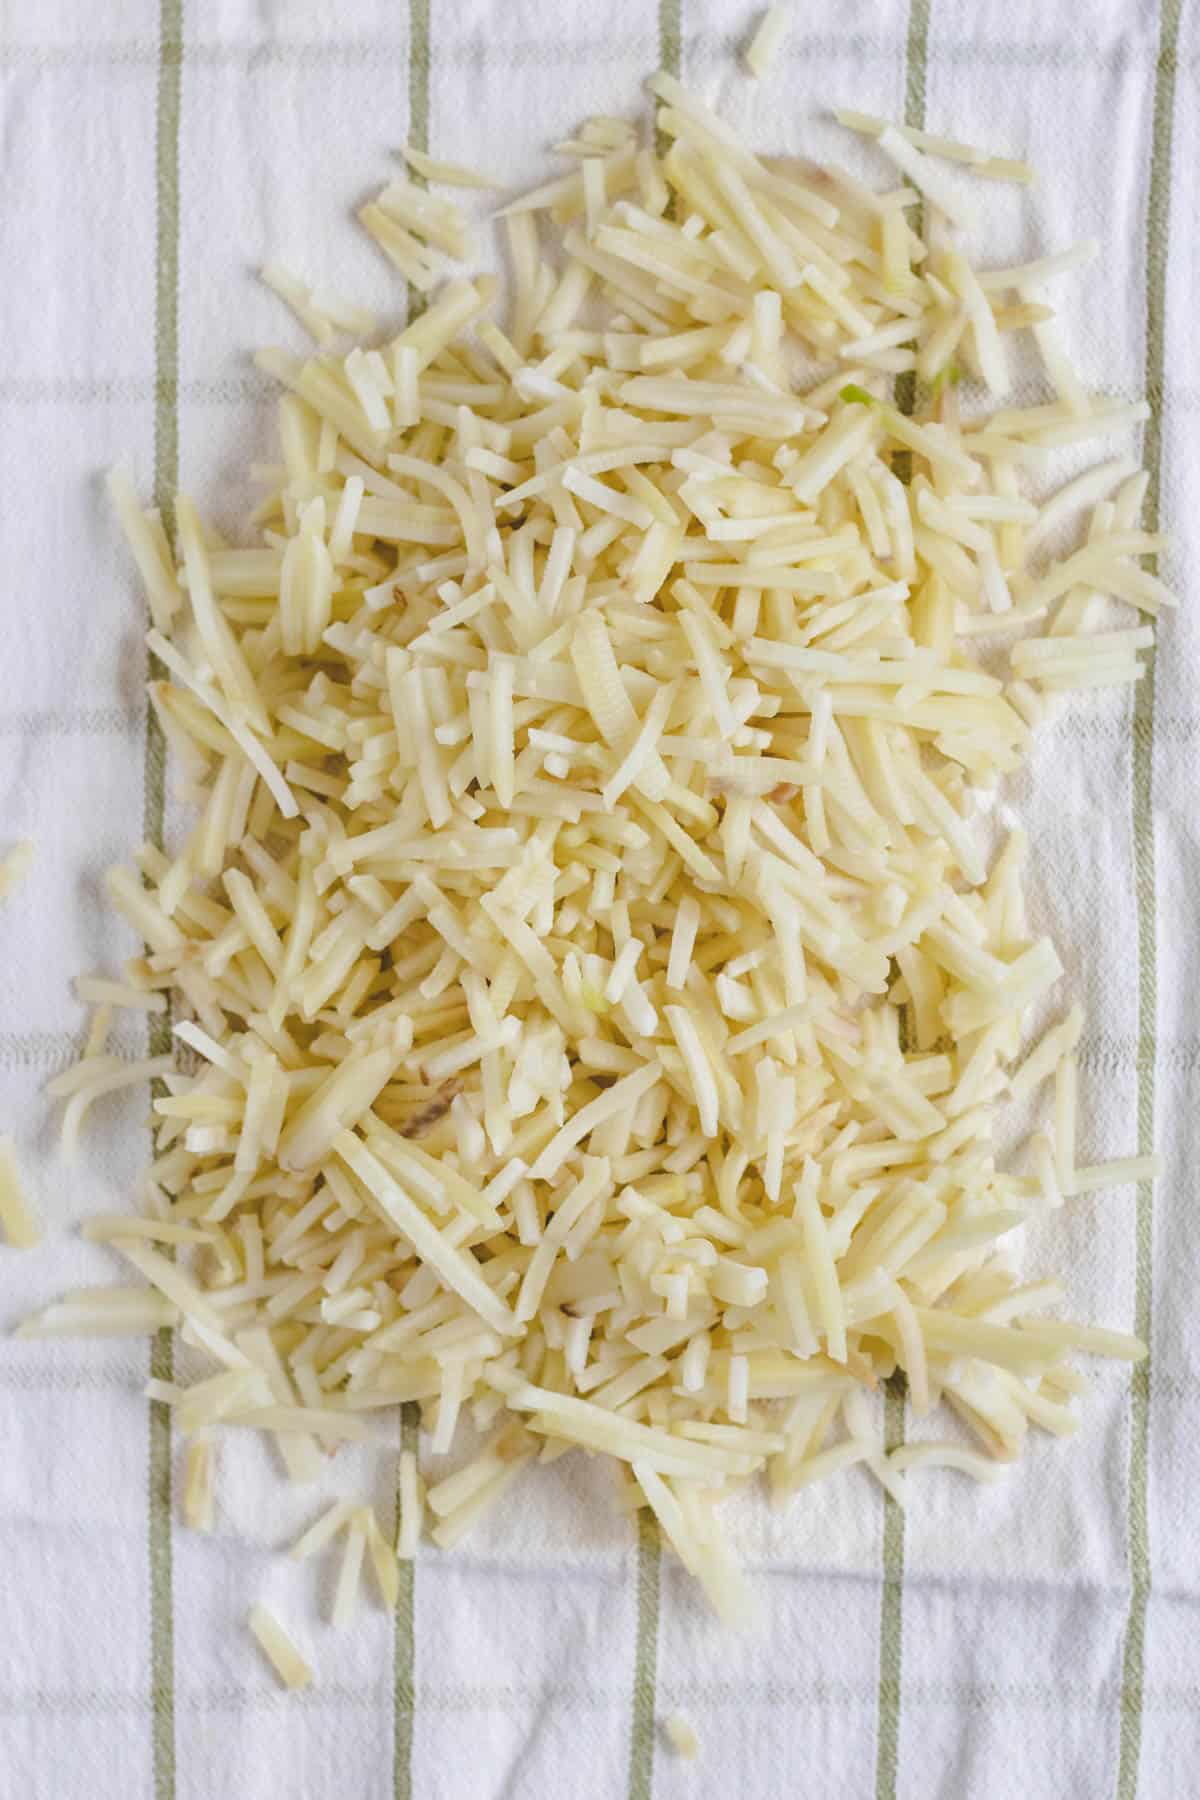 Uncooked hash browns on a kitchen towel to squeeze the moisture out of the potatoes.